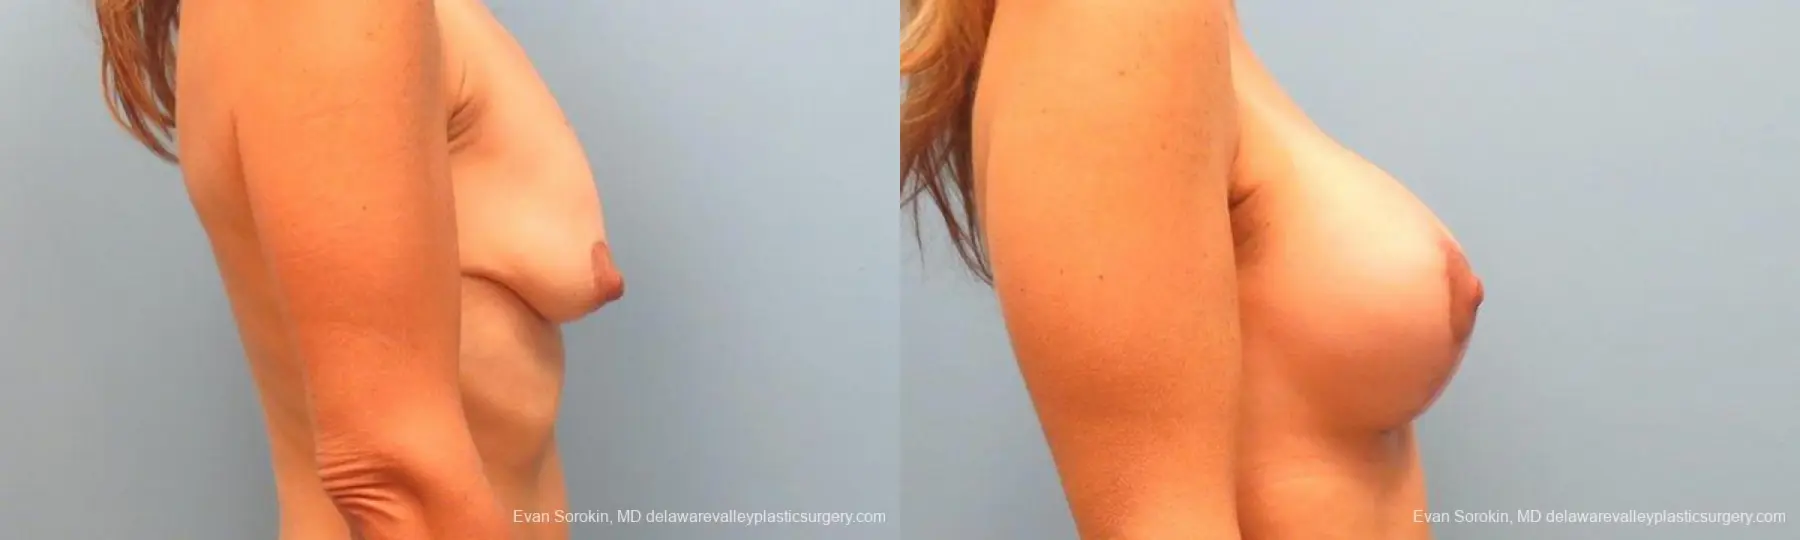 Philadelphia Breast Lift and Augmentation 9485 - Before and After 3